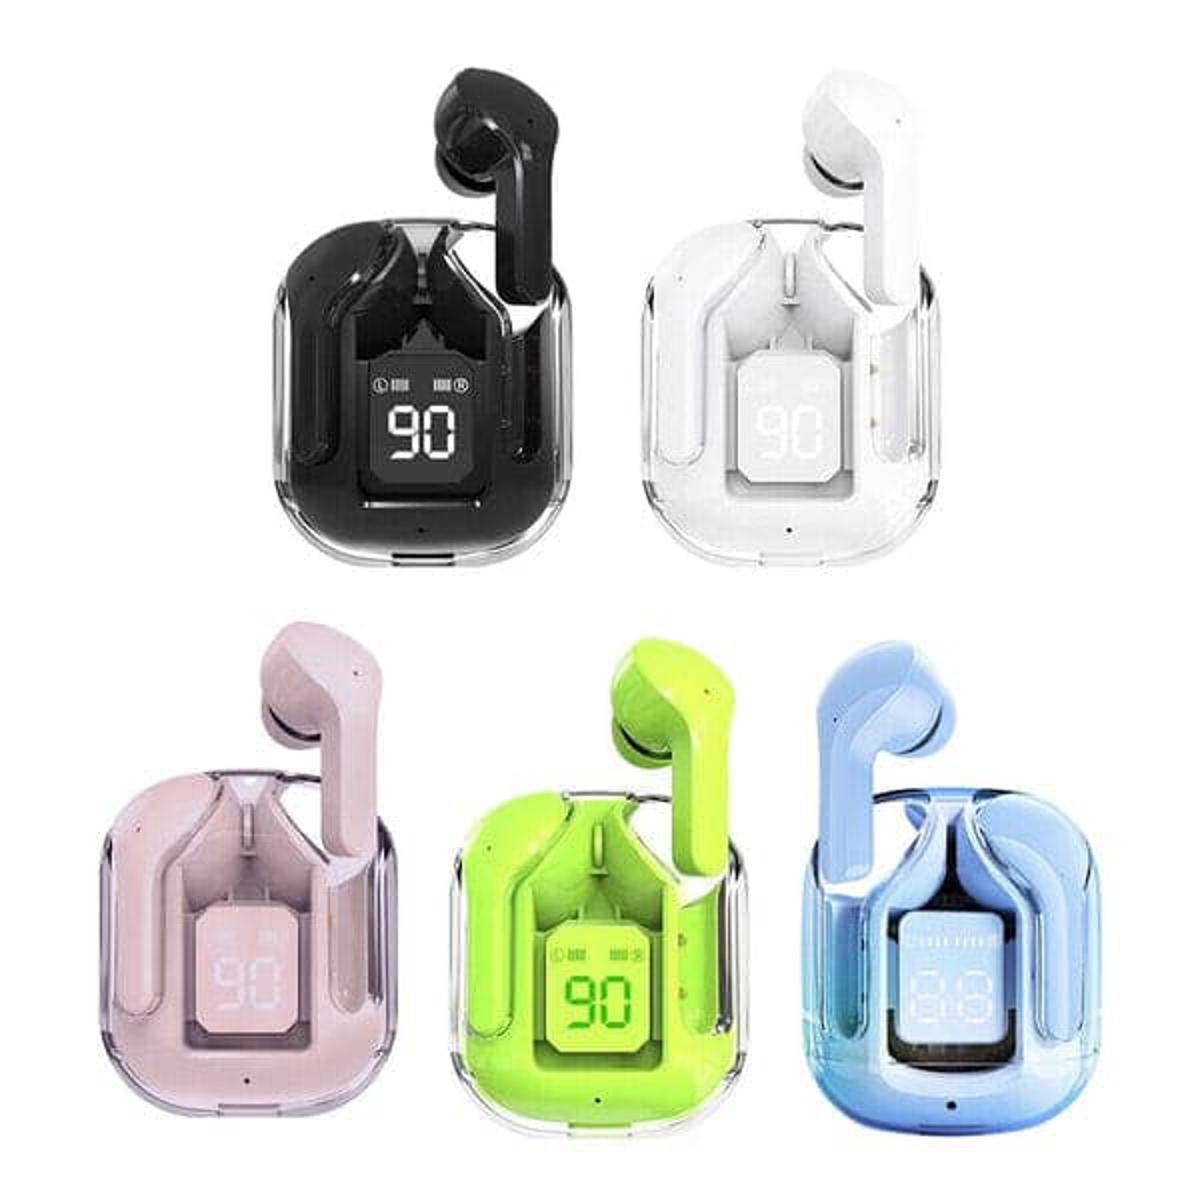 Wireless Crystal Earbuds LED Display